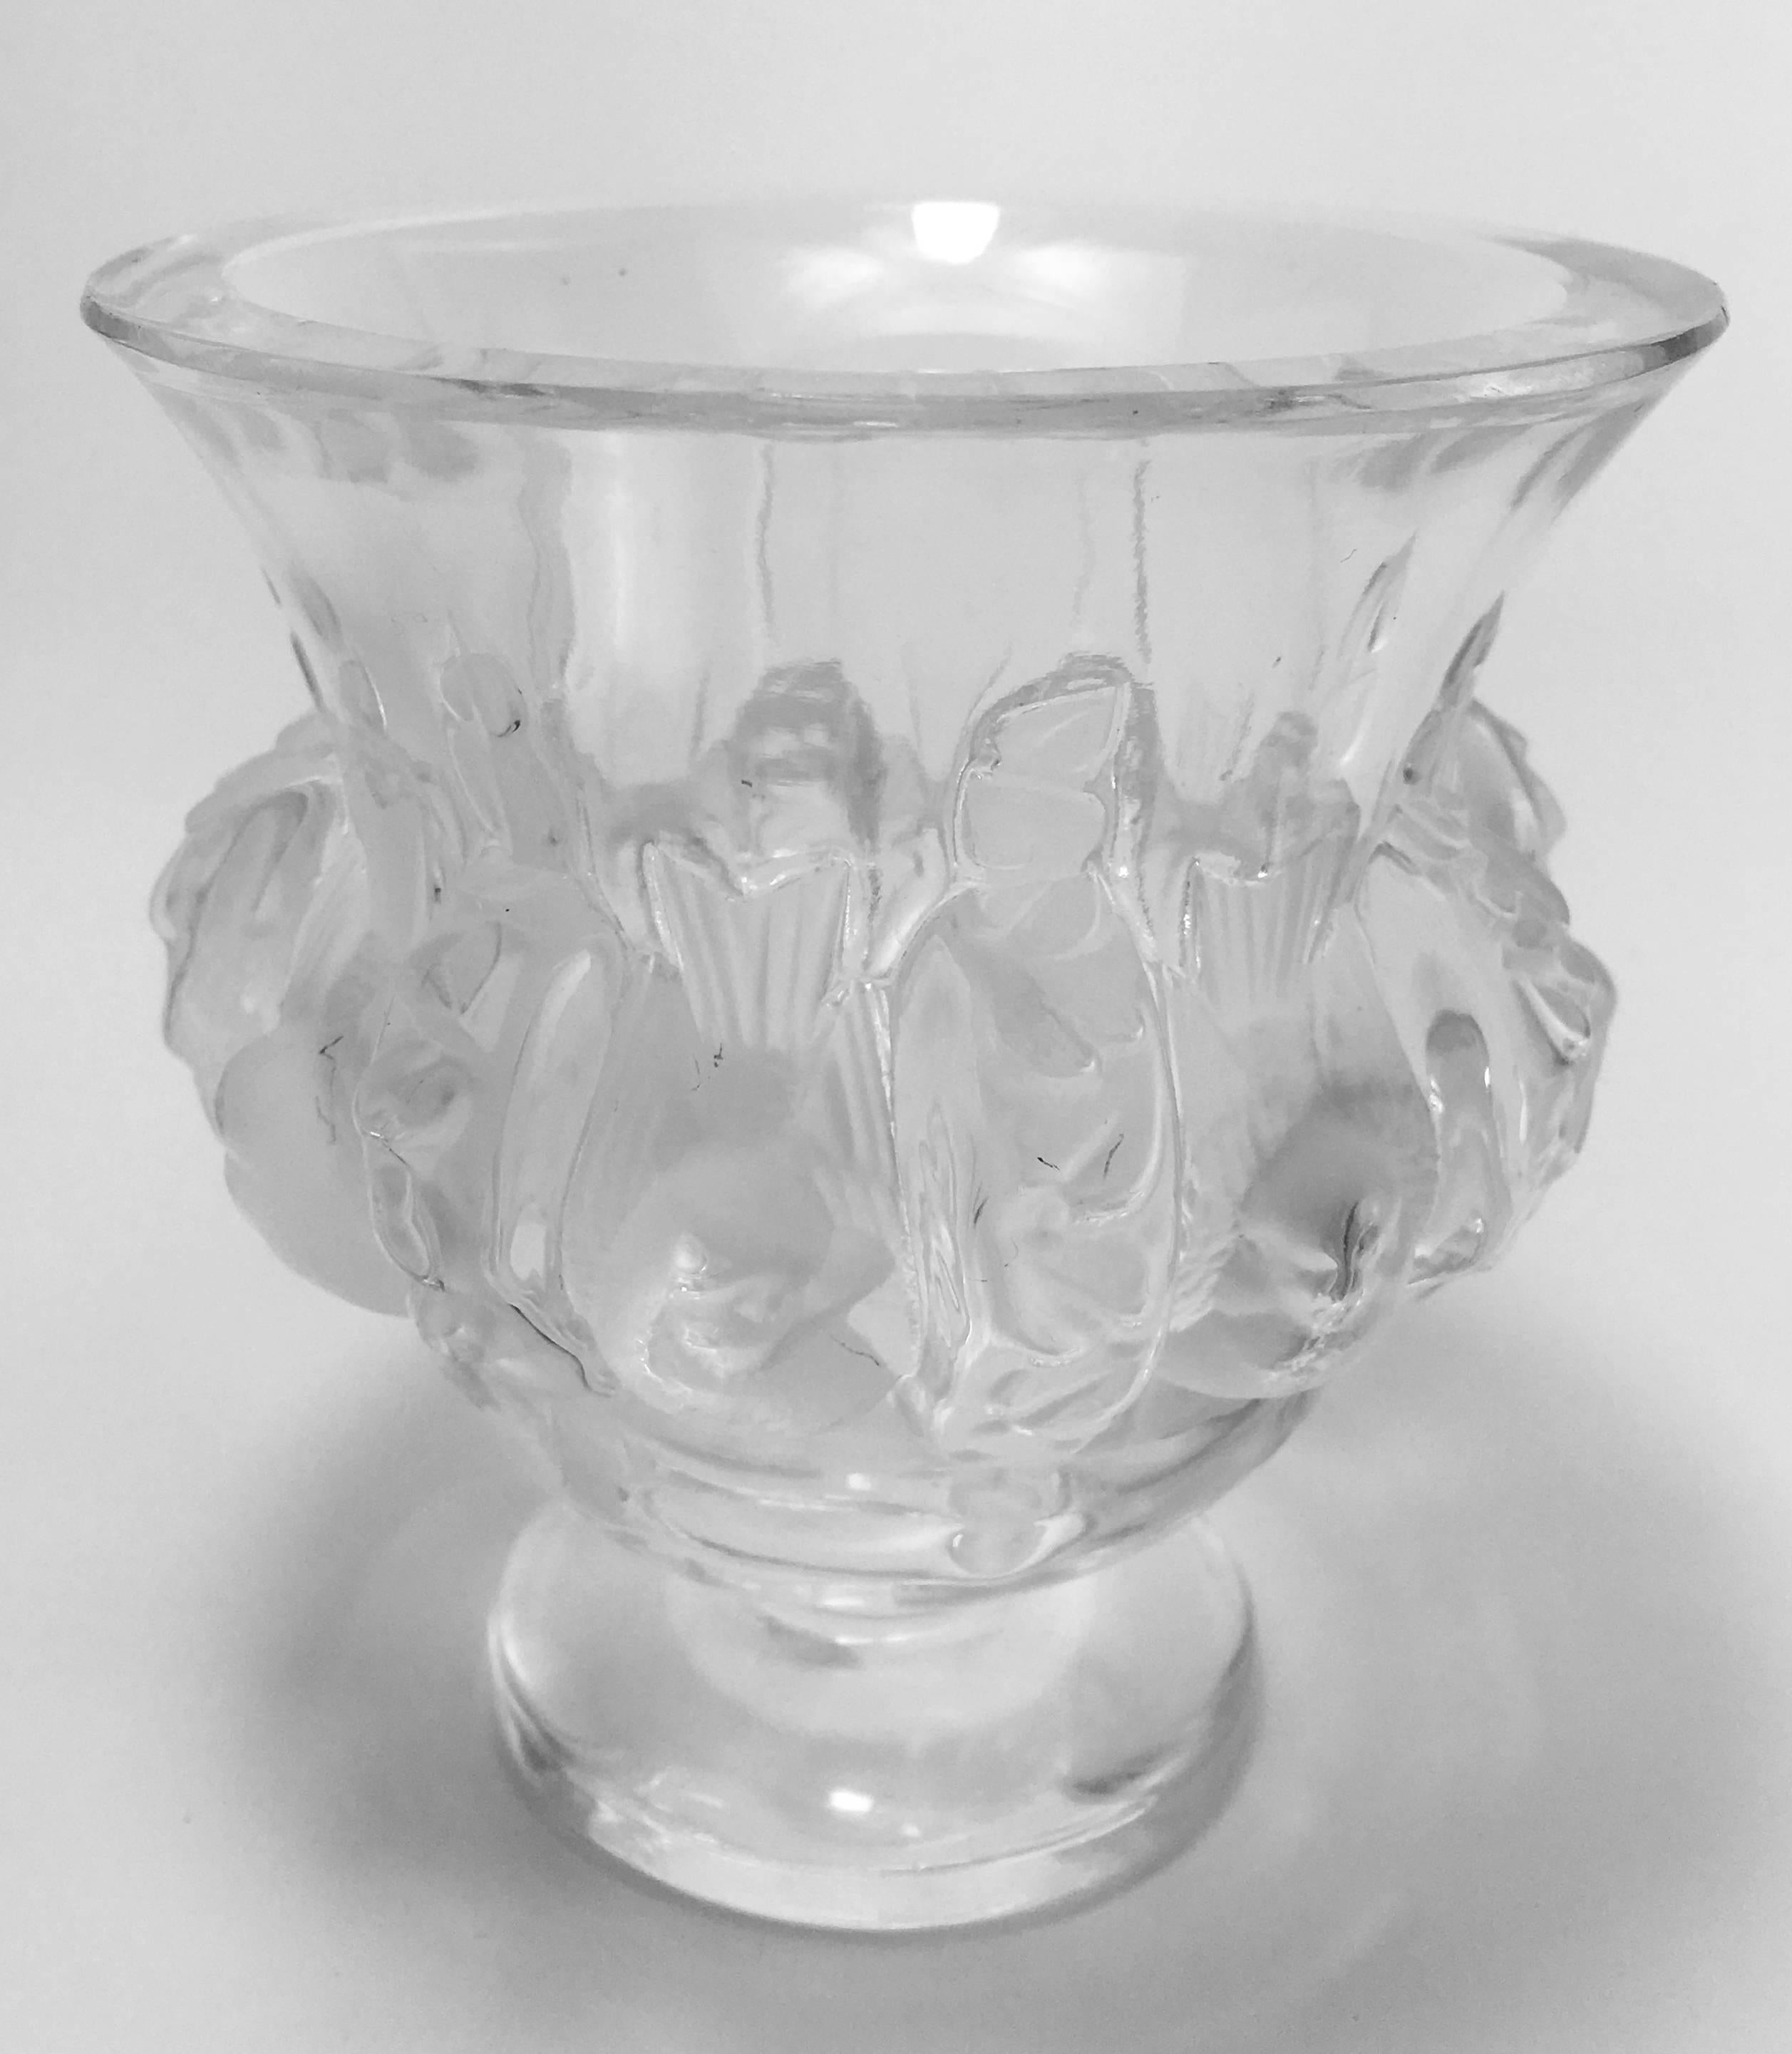 Molded French Art Deco Style Lalique Colorless and Frosted Crystal Dampierre Vase